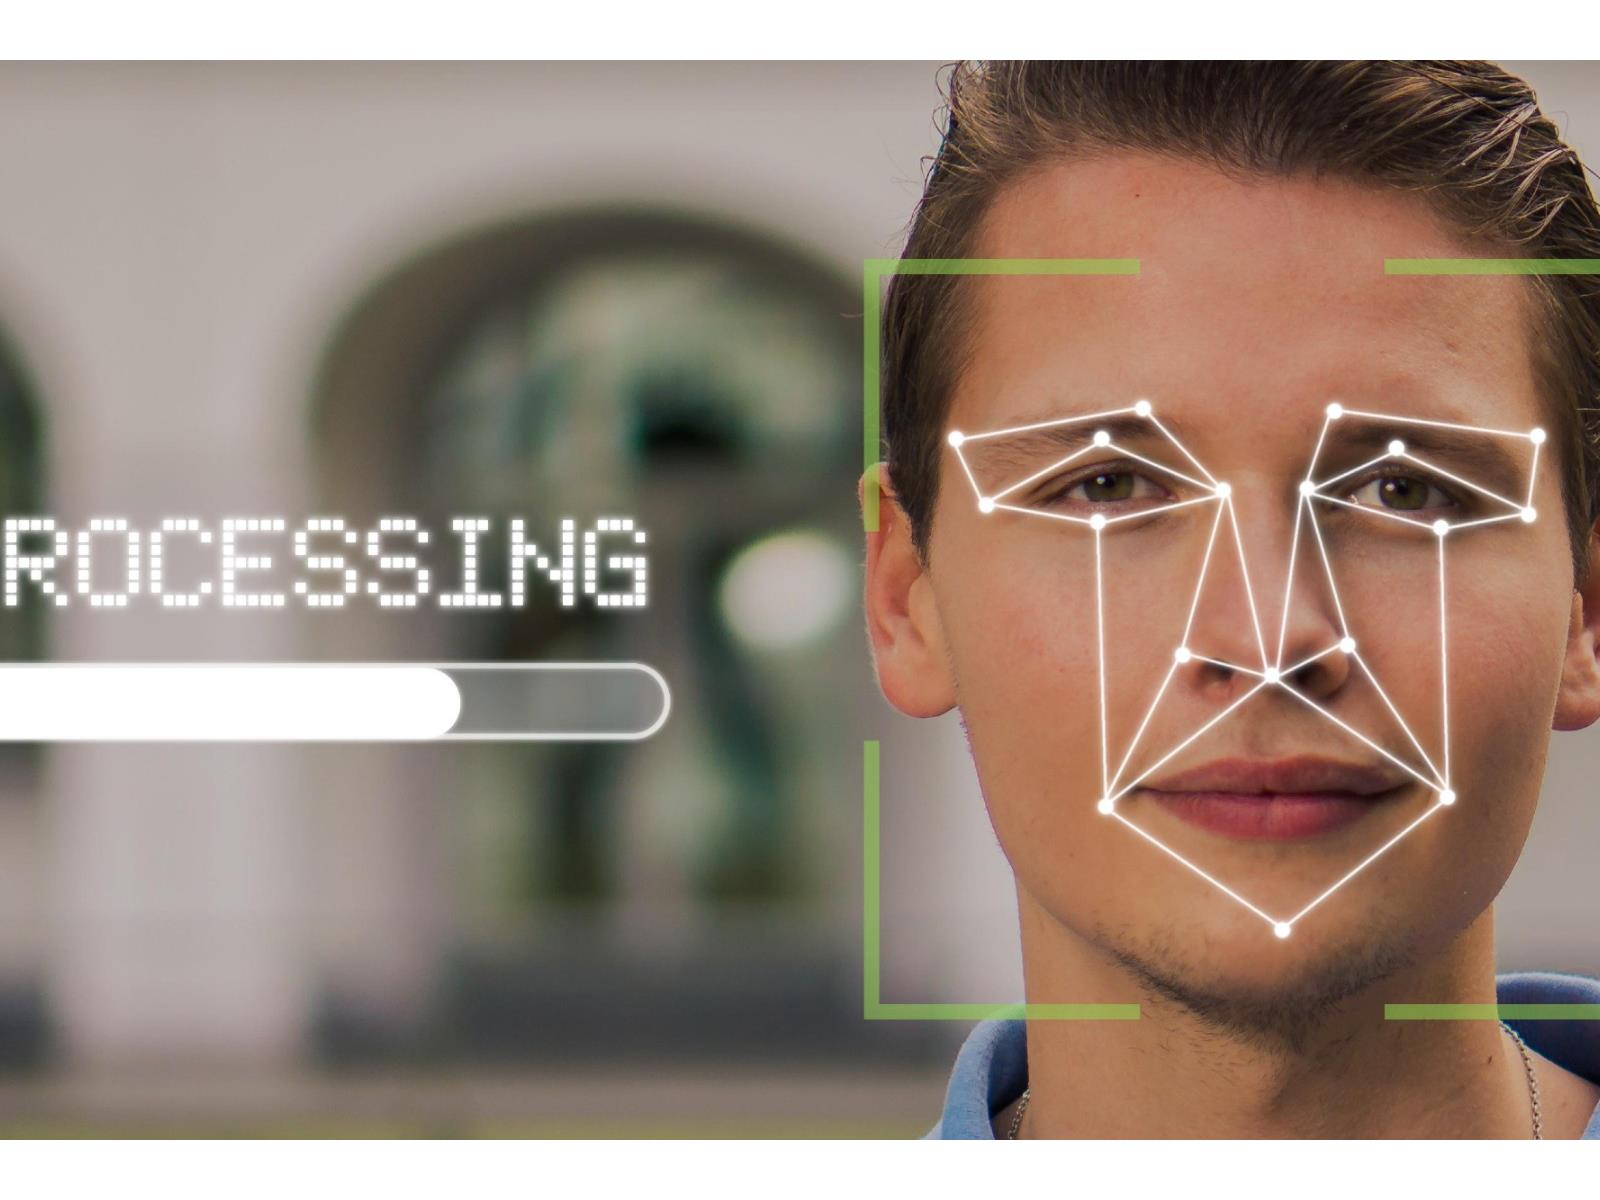 12 Incredible Search Engines That Use Facial Recognition To Search Faces